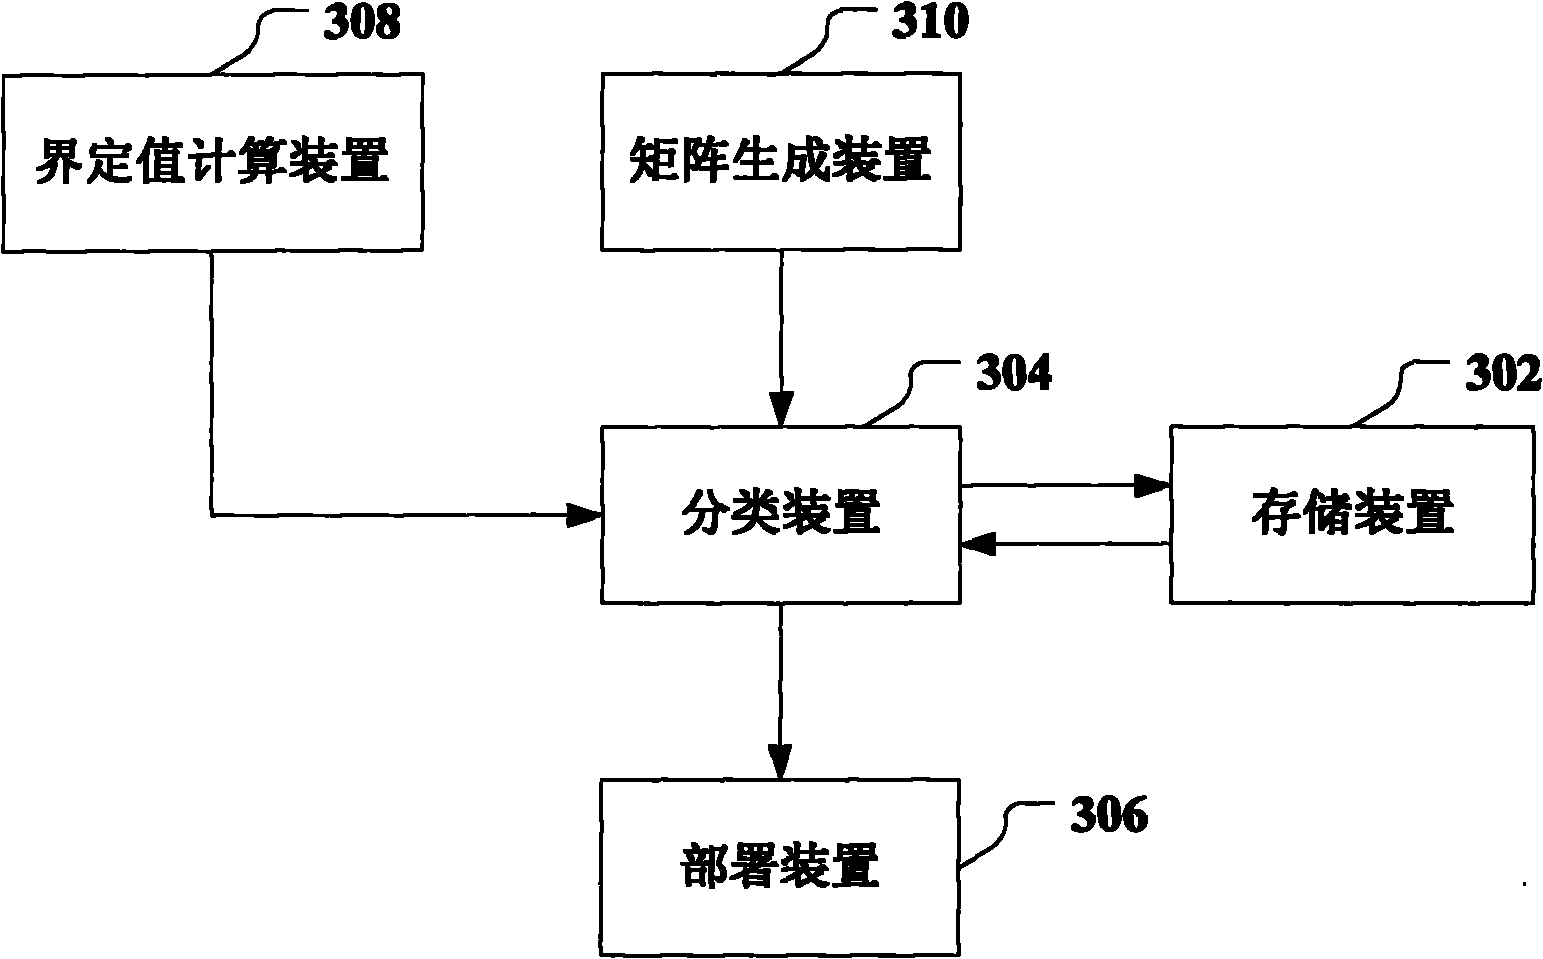 Business process method and system for business support system